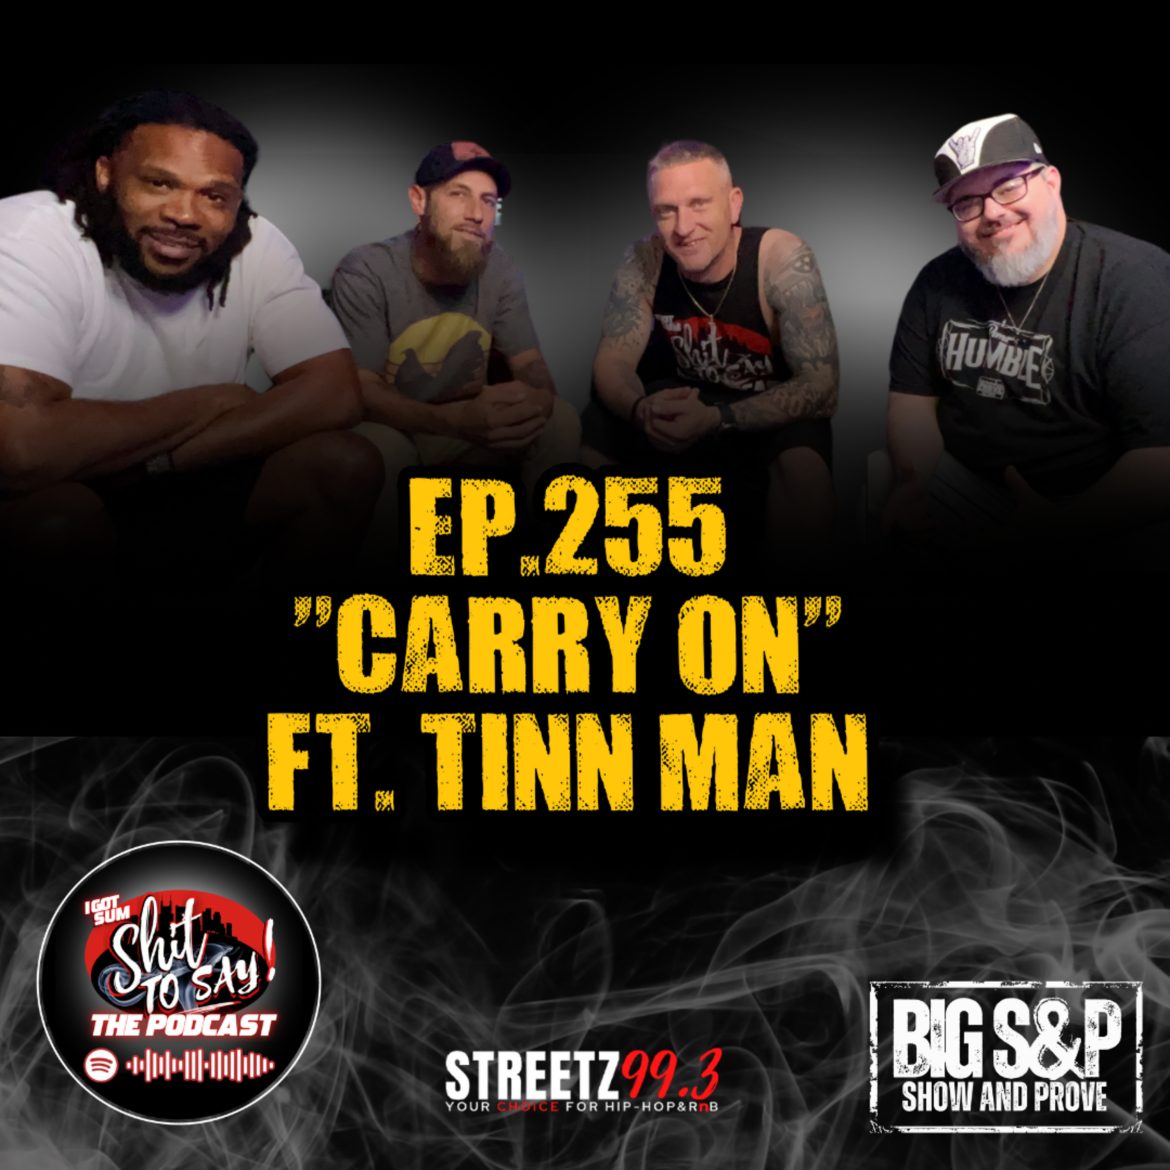 Black Podcasting - Episode 255 - "Carry On" Feat. Tinn Man